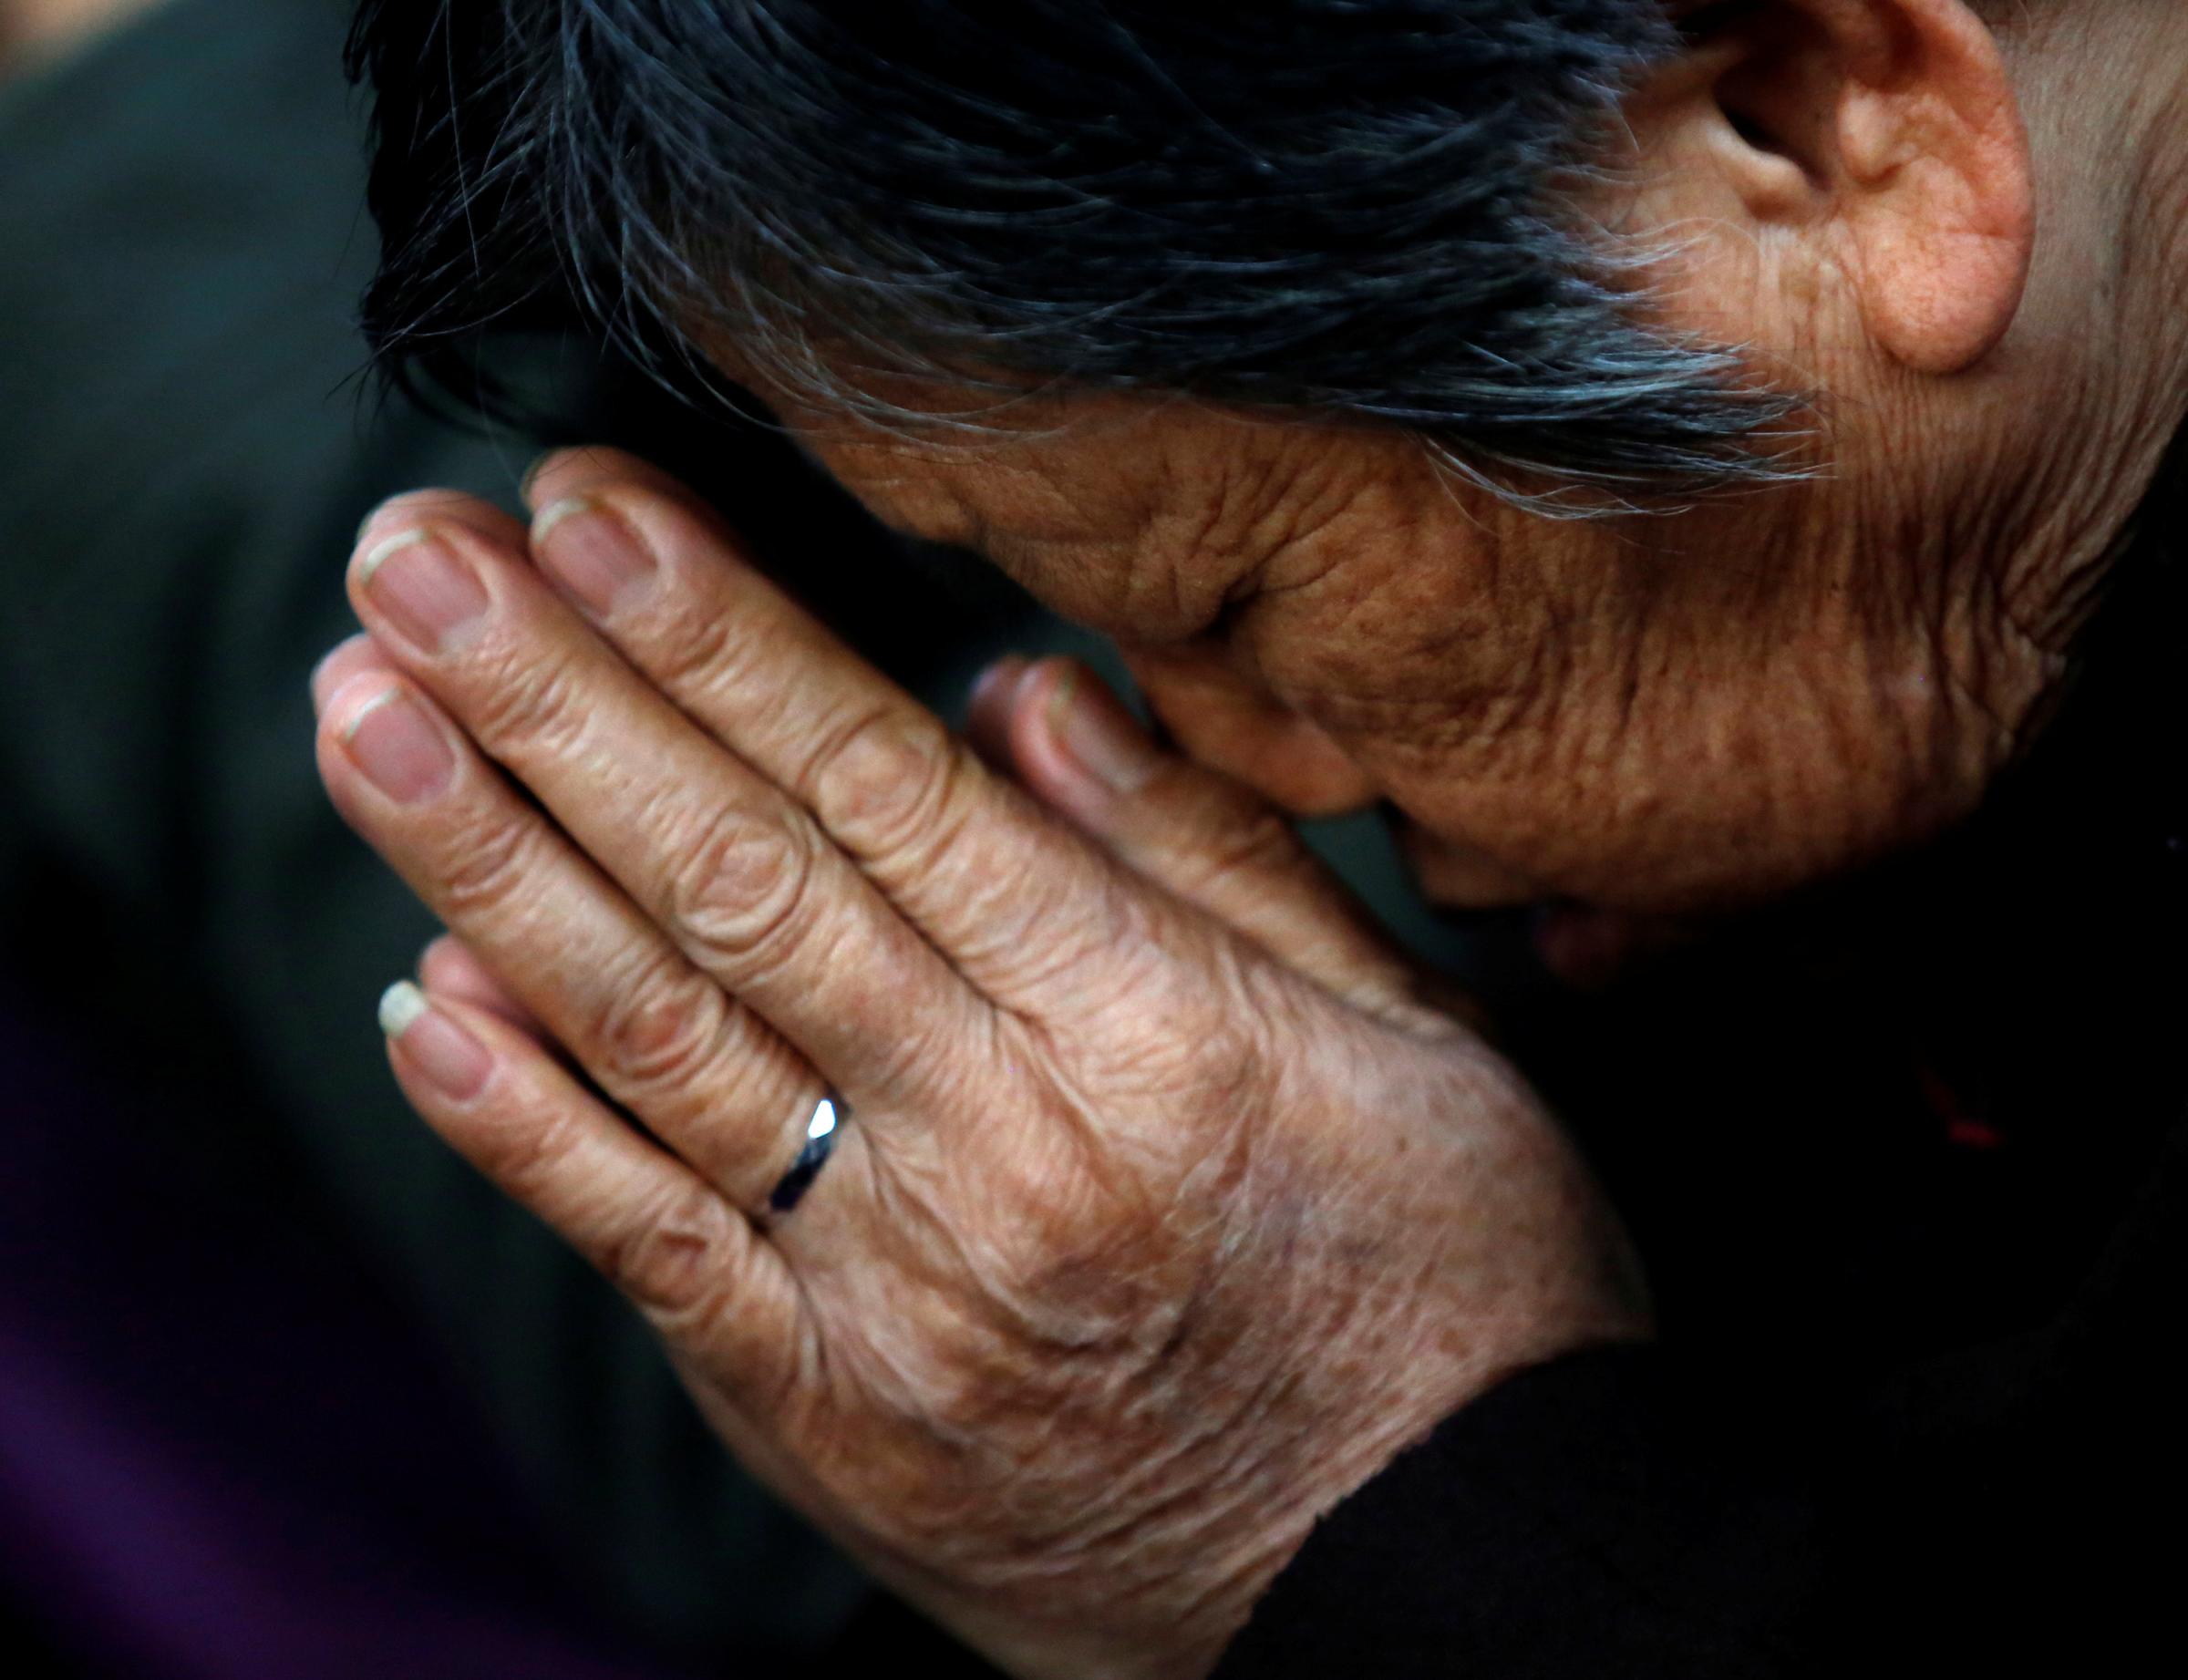 FILE PHOTO: A believer prays during a weekend mass at an underground Catholic church in Tianjin